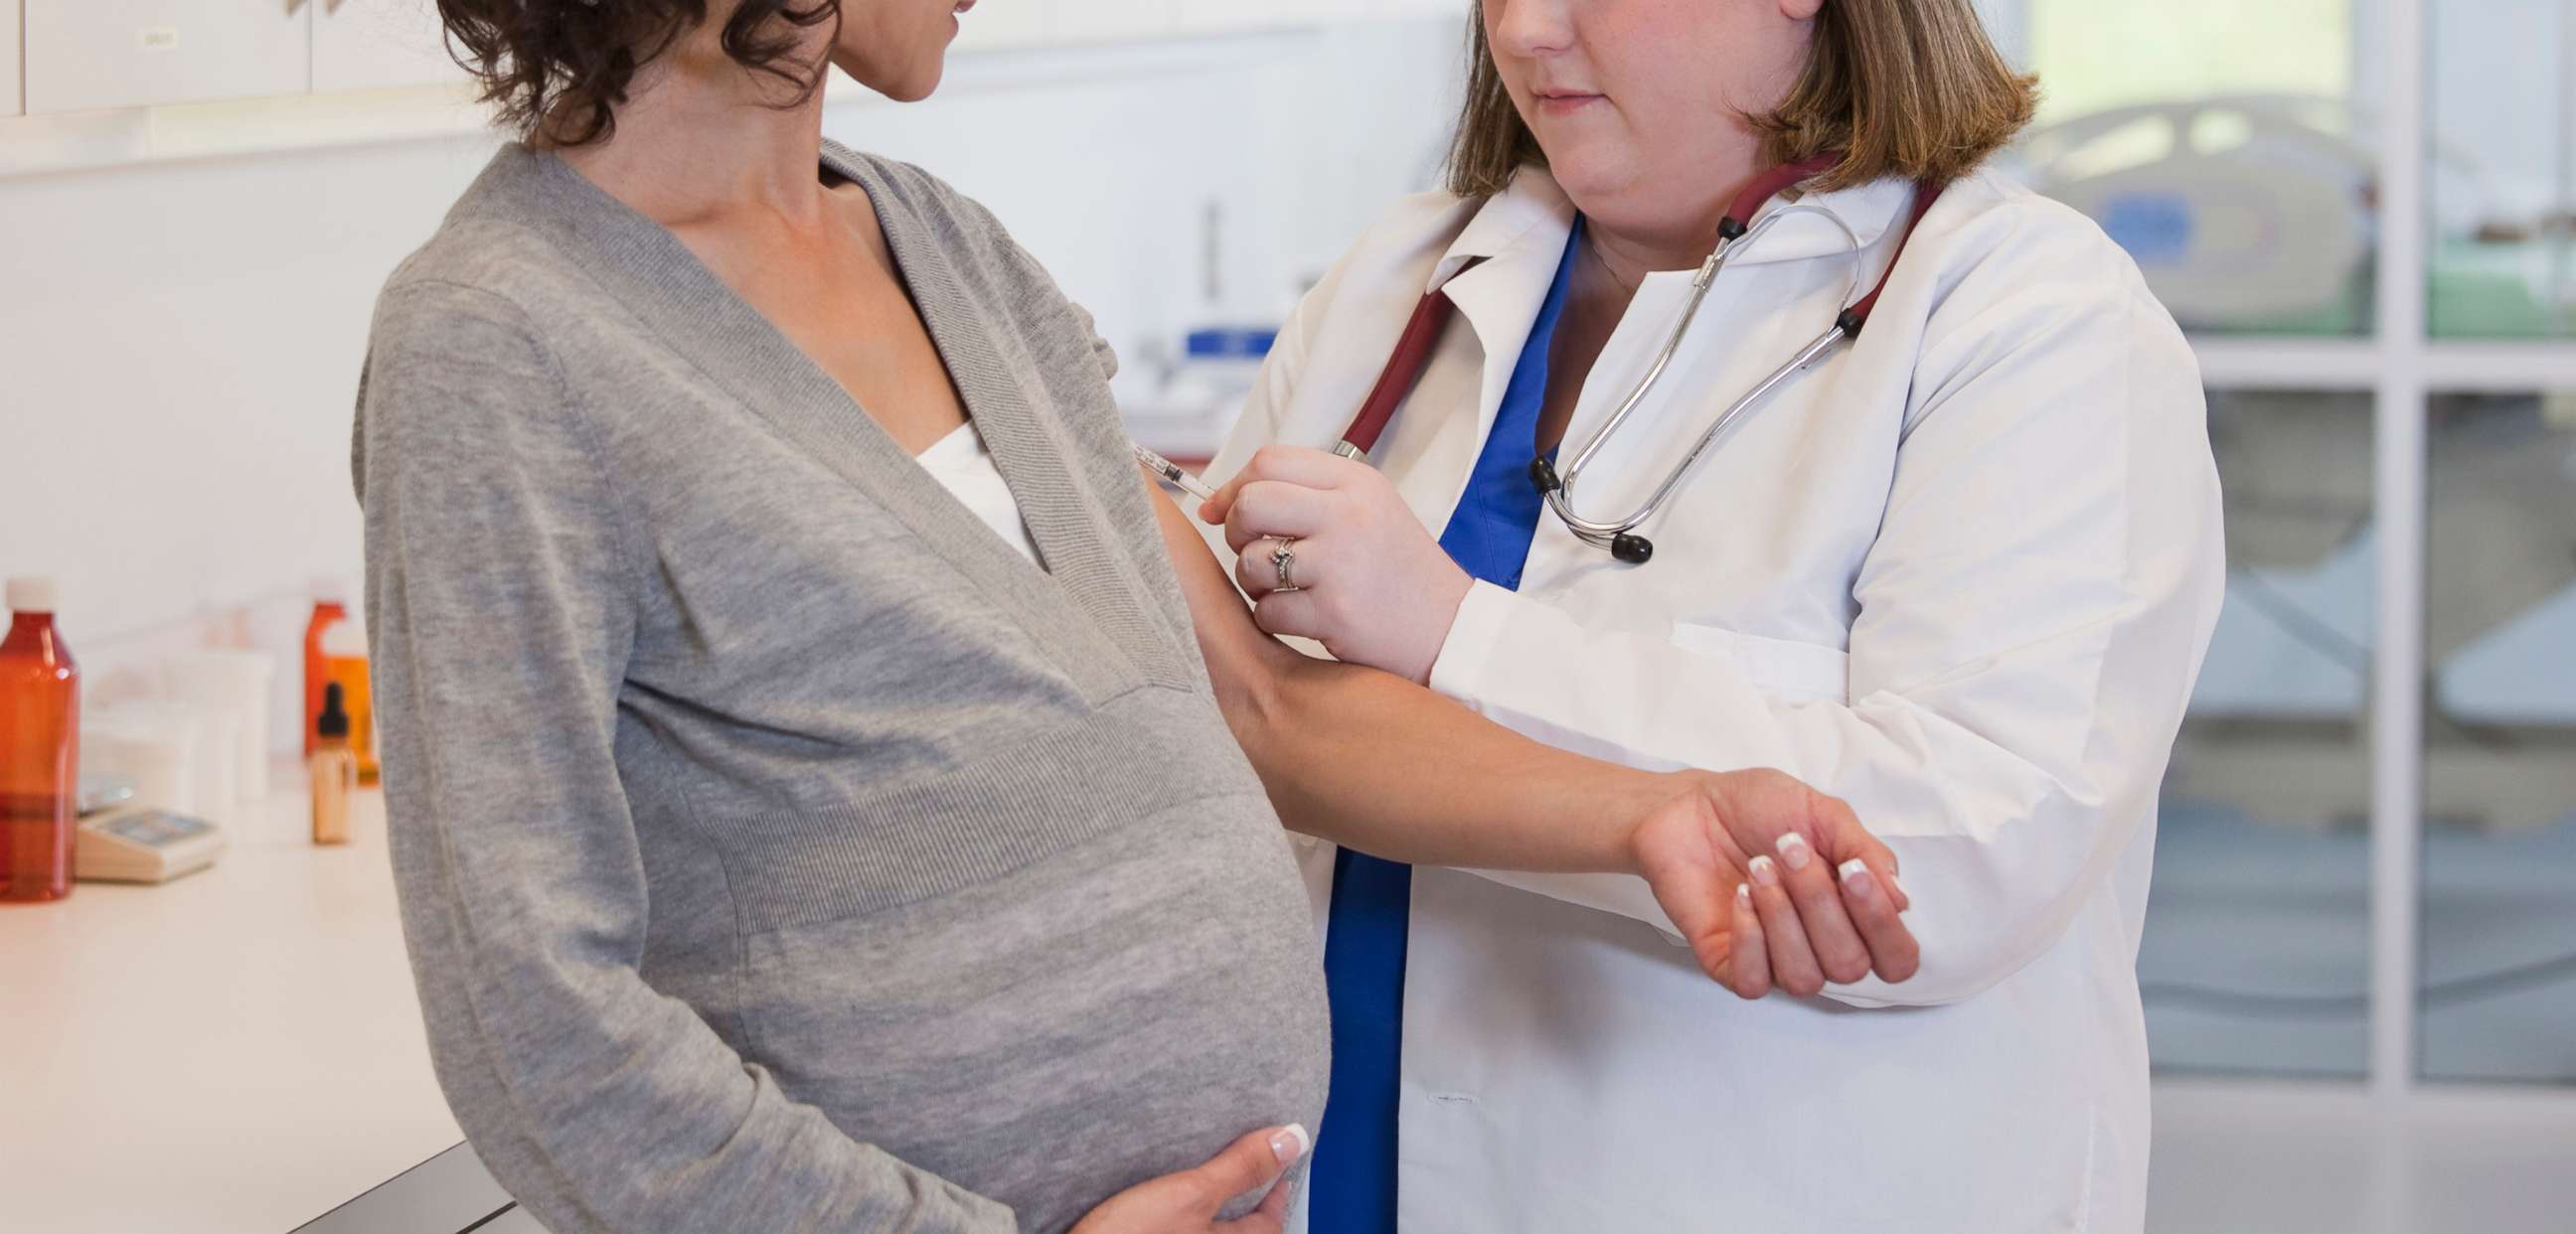 PHOTO: A pregnant woman is seen here with her dr in this undated stock photo.